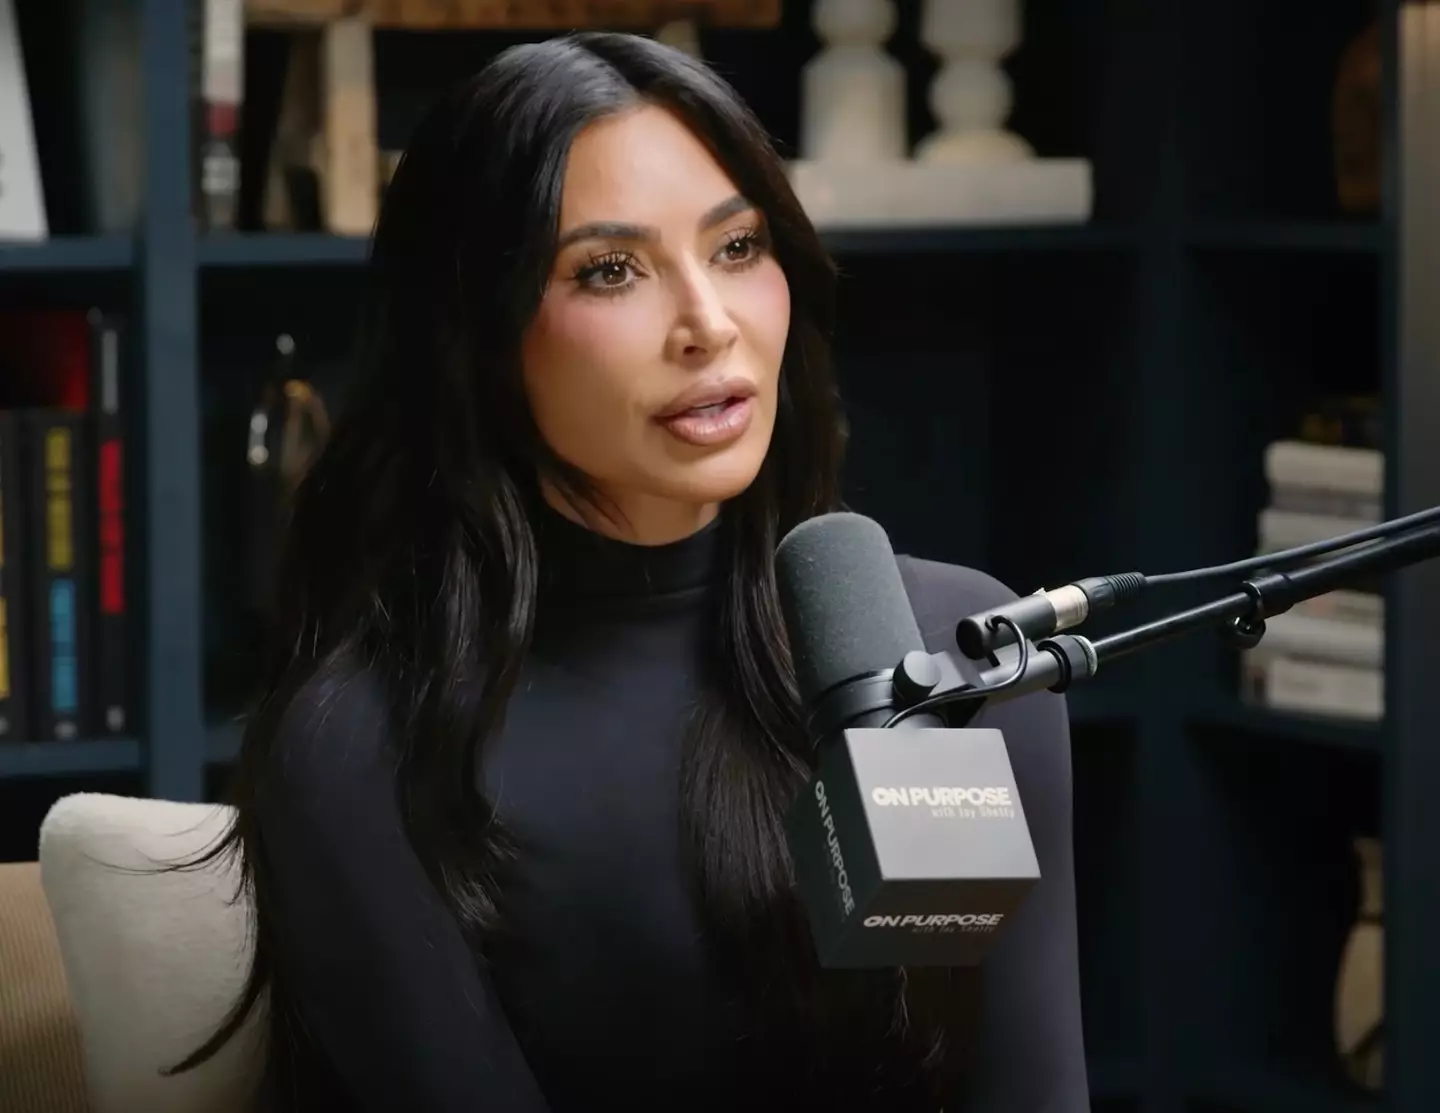 Kim Kardashian opened up about how much pressure Kanye puts her under.